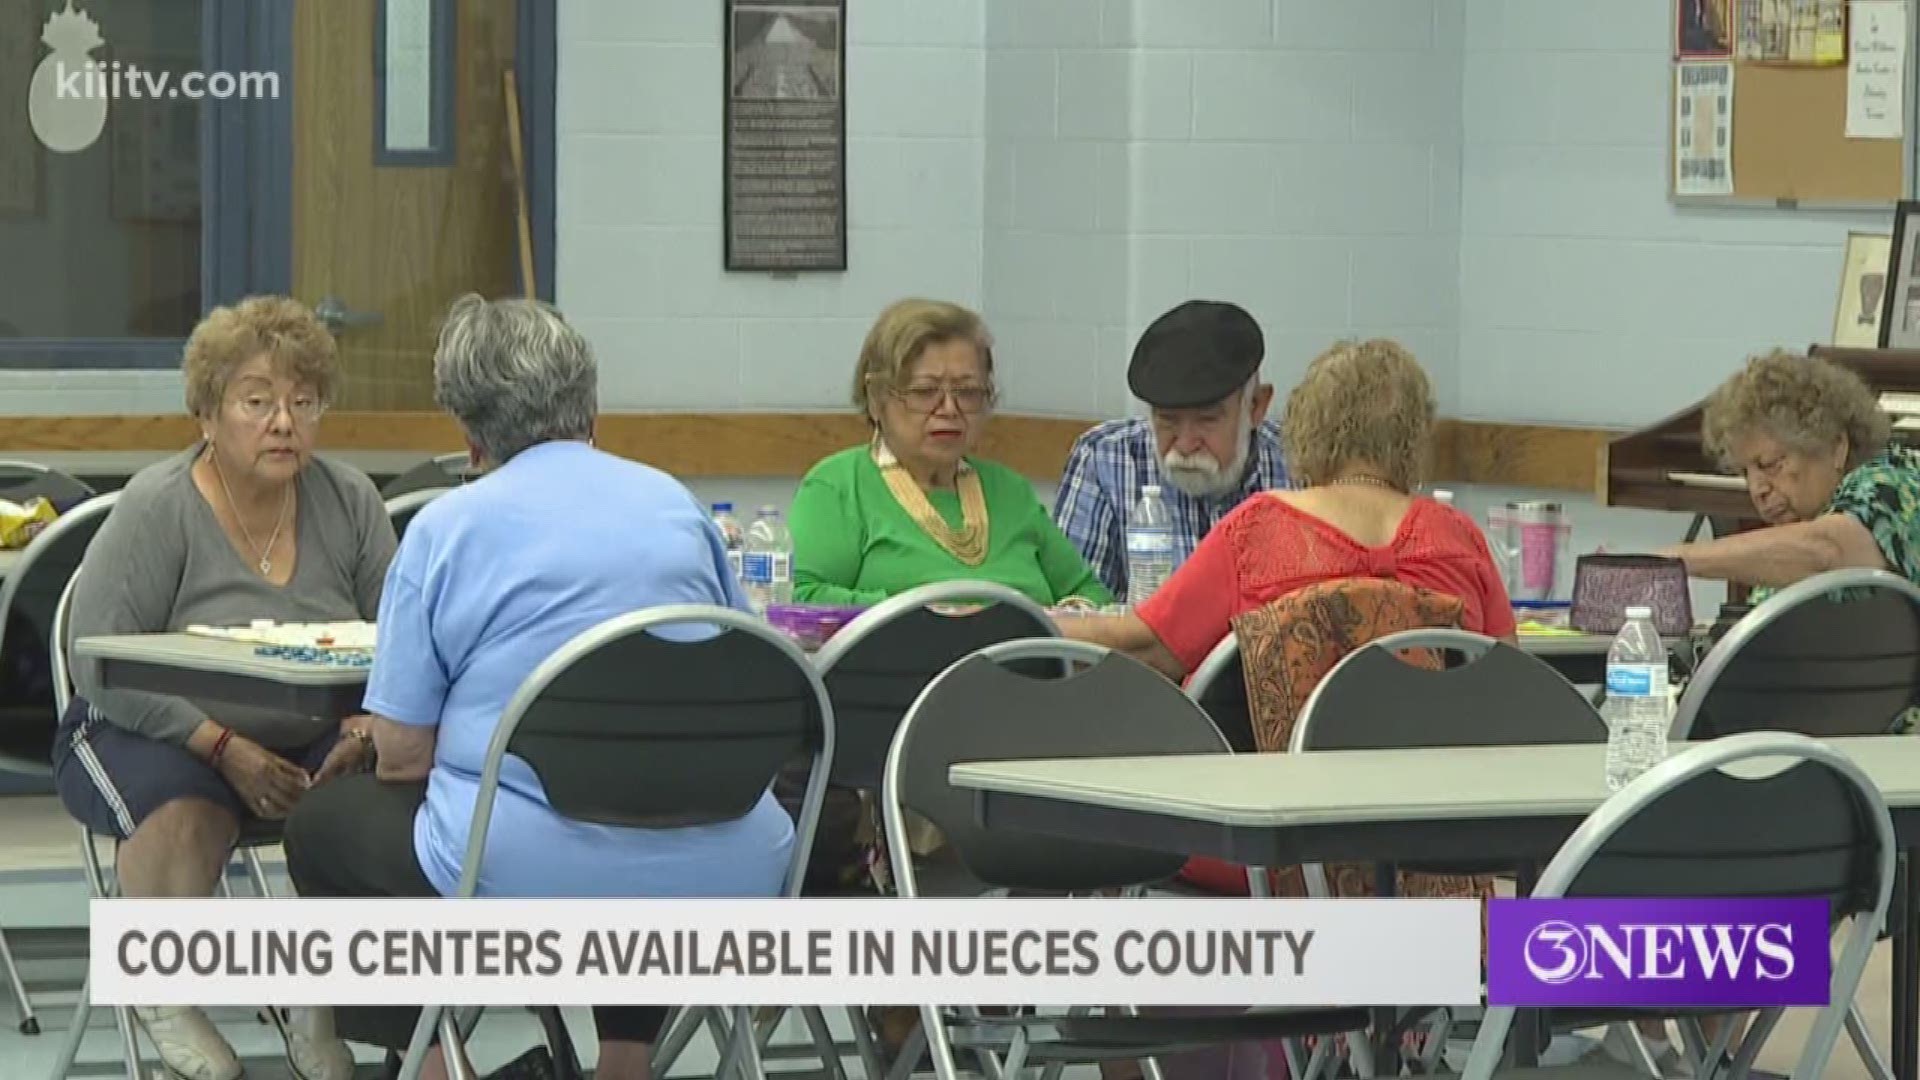 Due to recent heat advisories in the Coastal Bend, Nueces County officials have decided to open up cooling centers for residents to escape the heat.